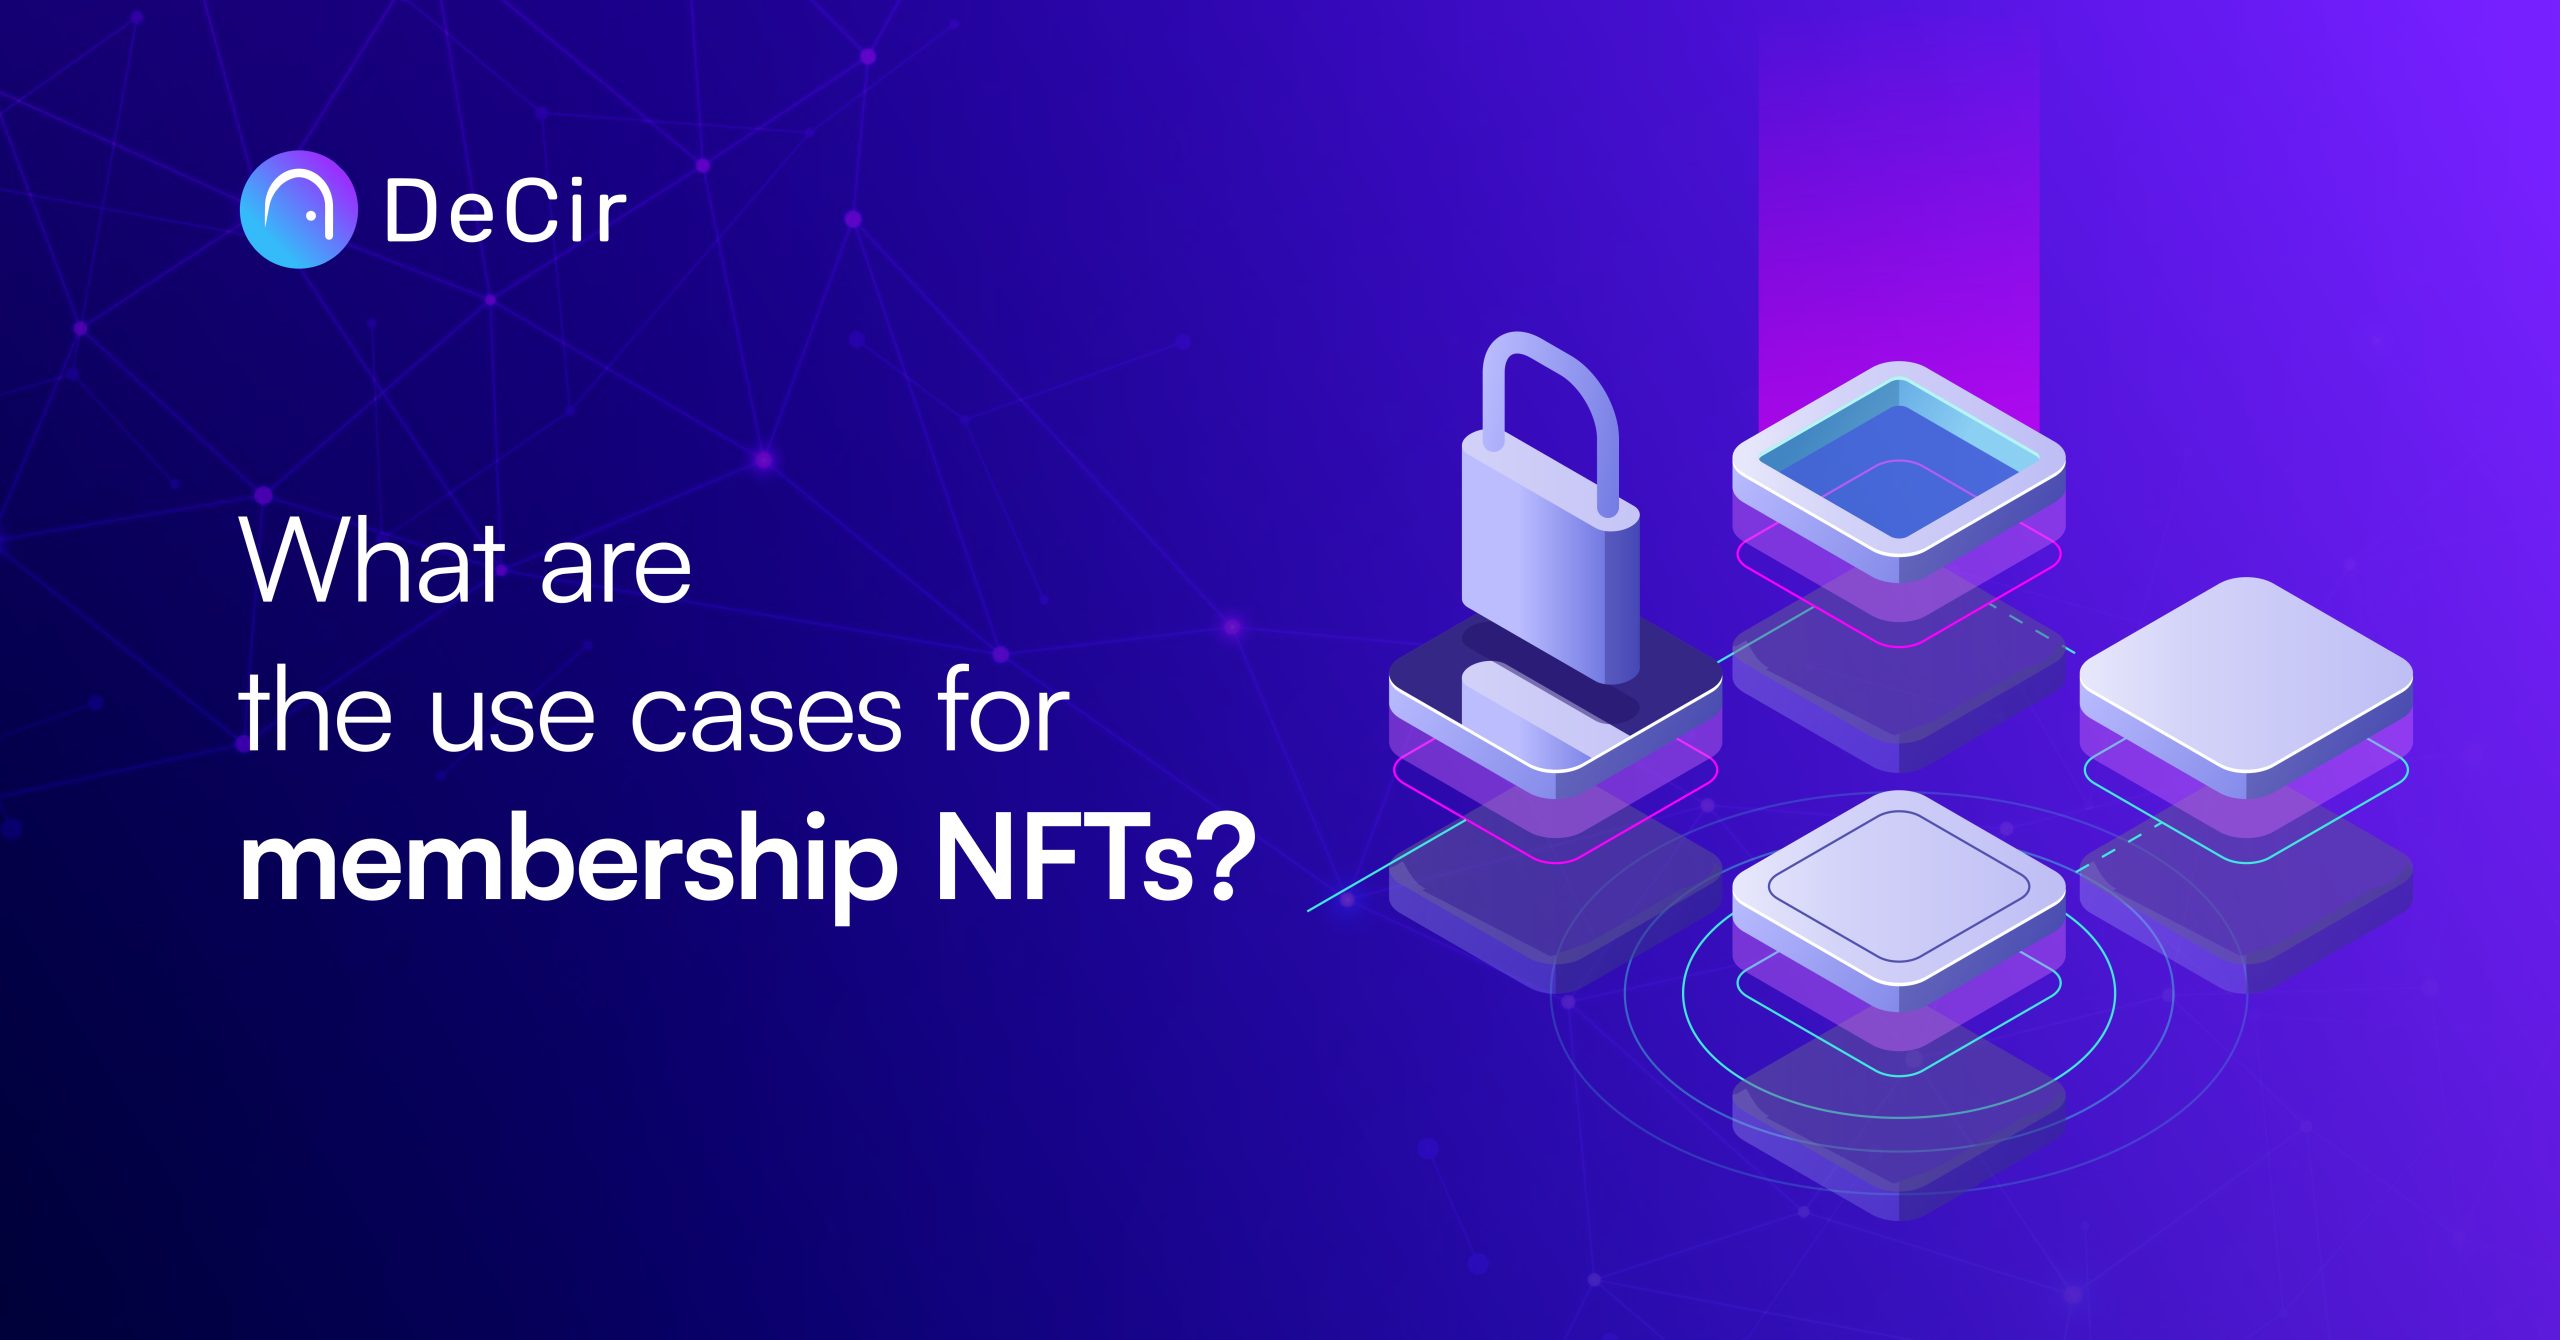 What are the use cases of membership NFT?